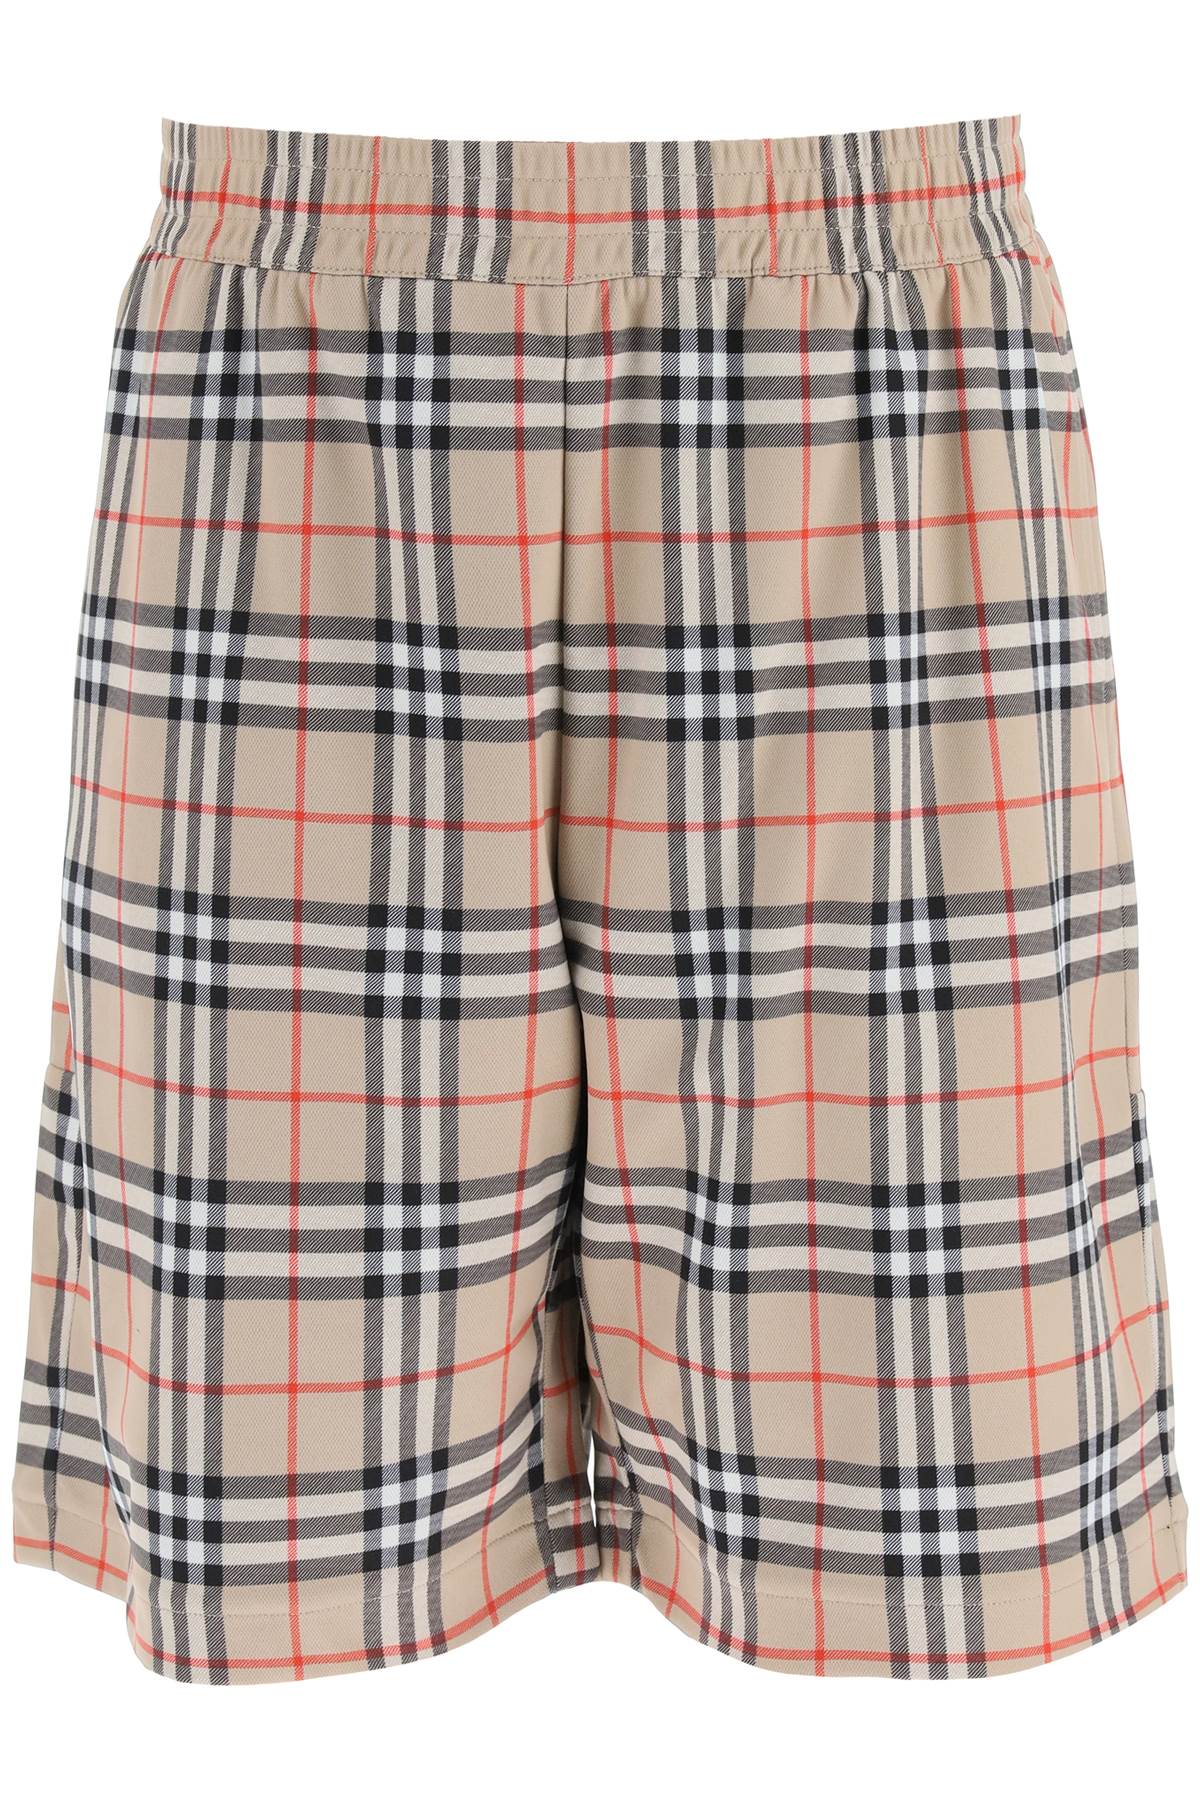 Burberry Debson Vintage Check Shorts-Burberry-S-Urbanheer